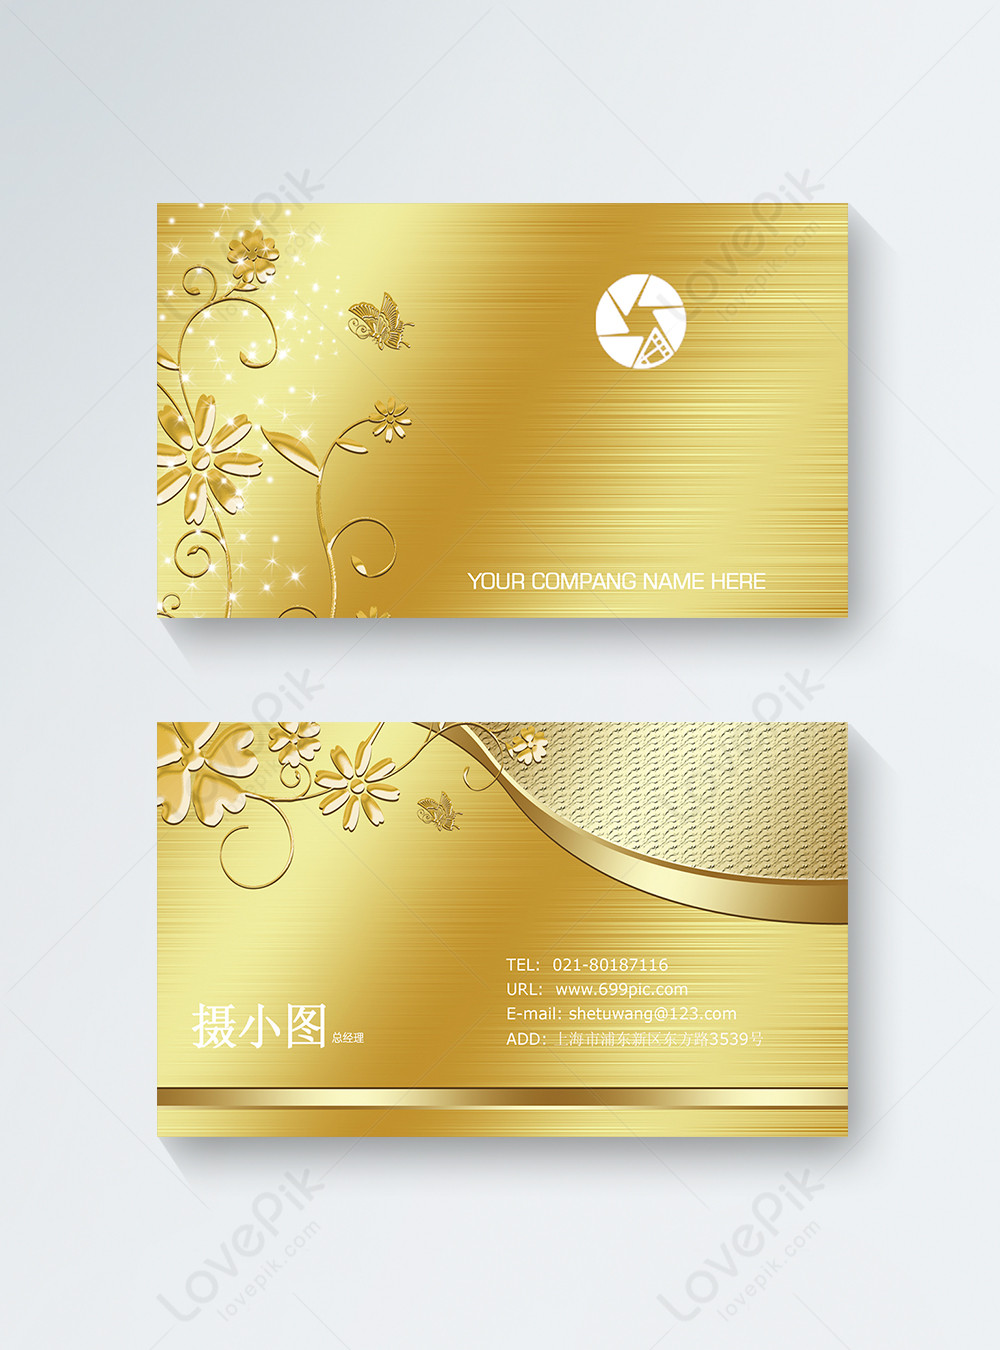 Gold luxury business personal business card design template template ...